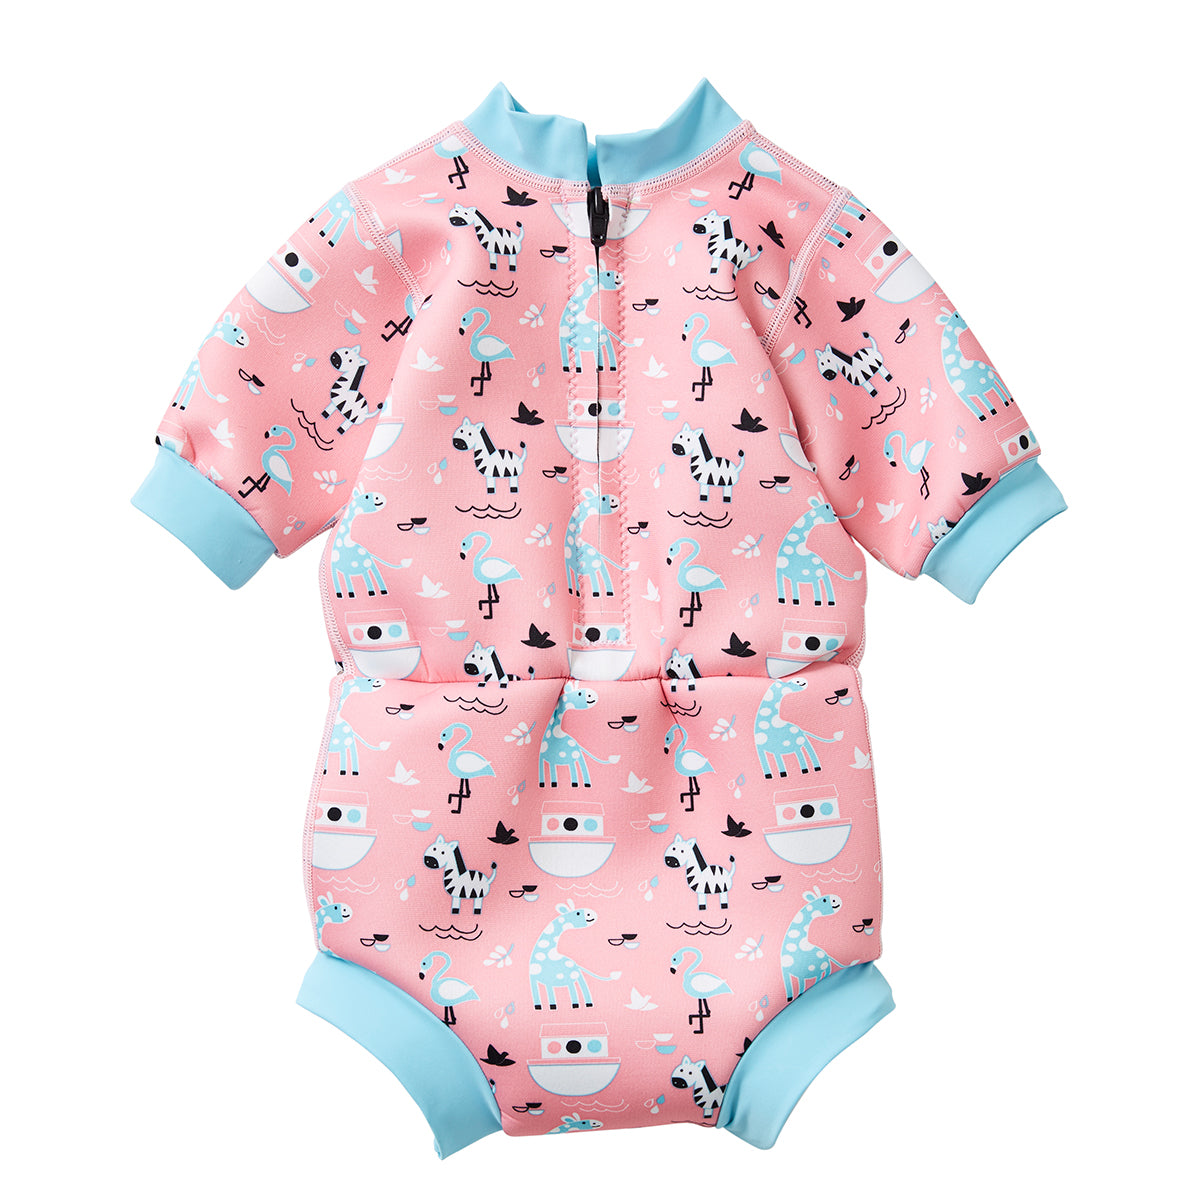 Baby swim nappy wetsuit in pink and blue Nina's Ark print. Back.